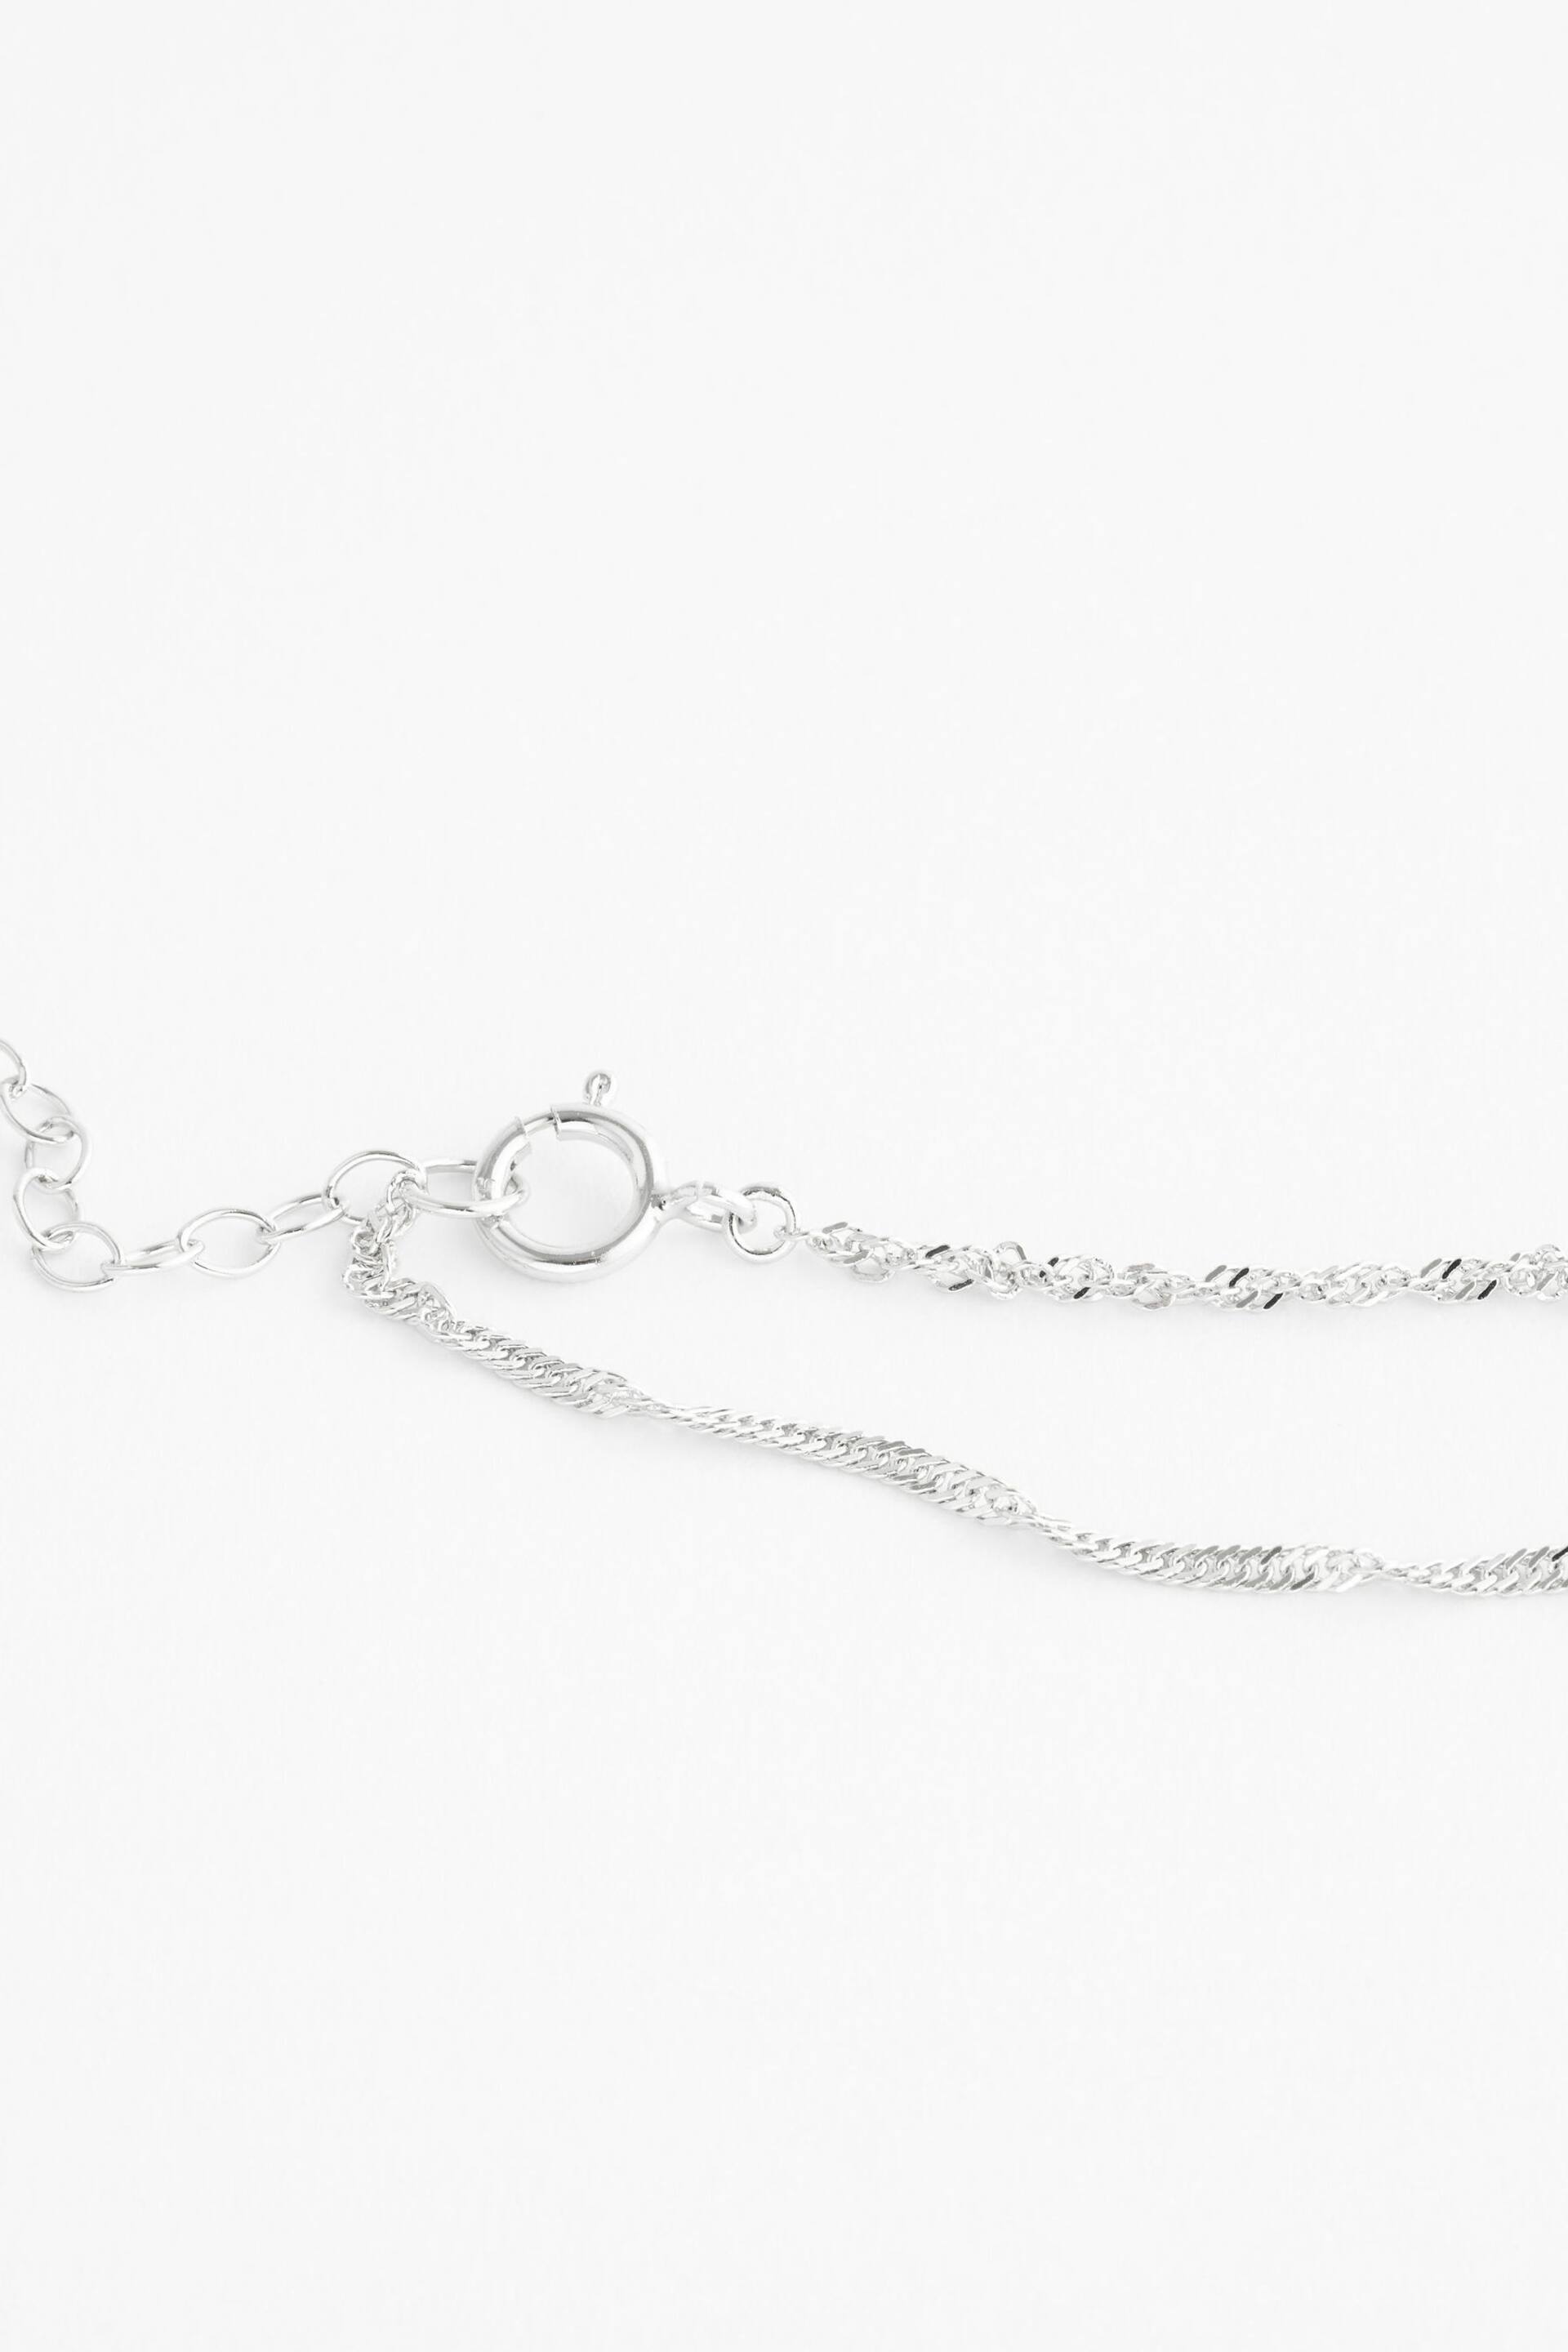 Sterling Silver Twisted Chain Anklet - Image 6 of 10